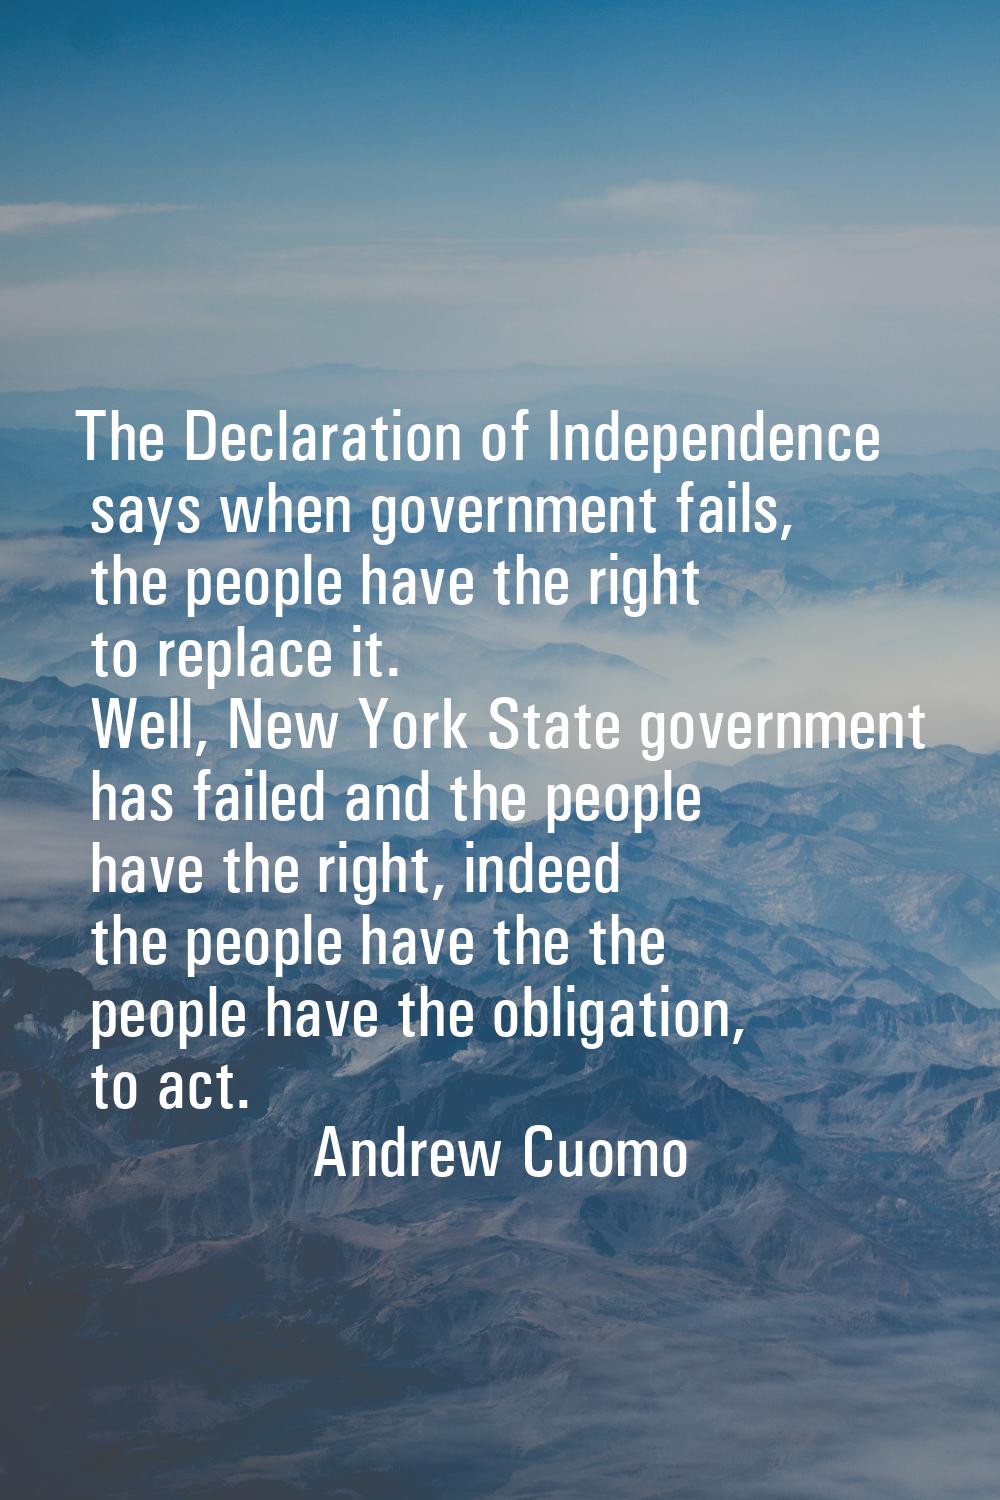 The Declaration of Independence says when government fails, the people have the right to replace it